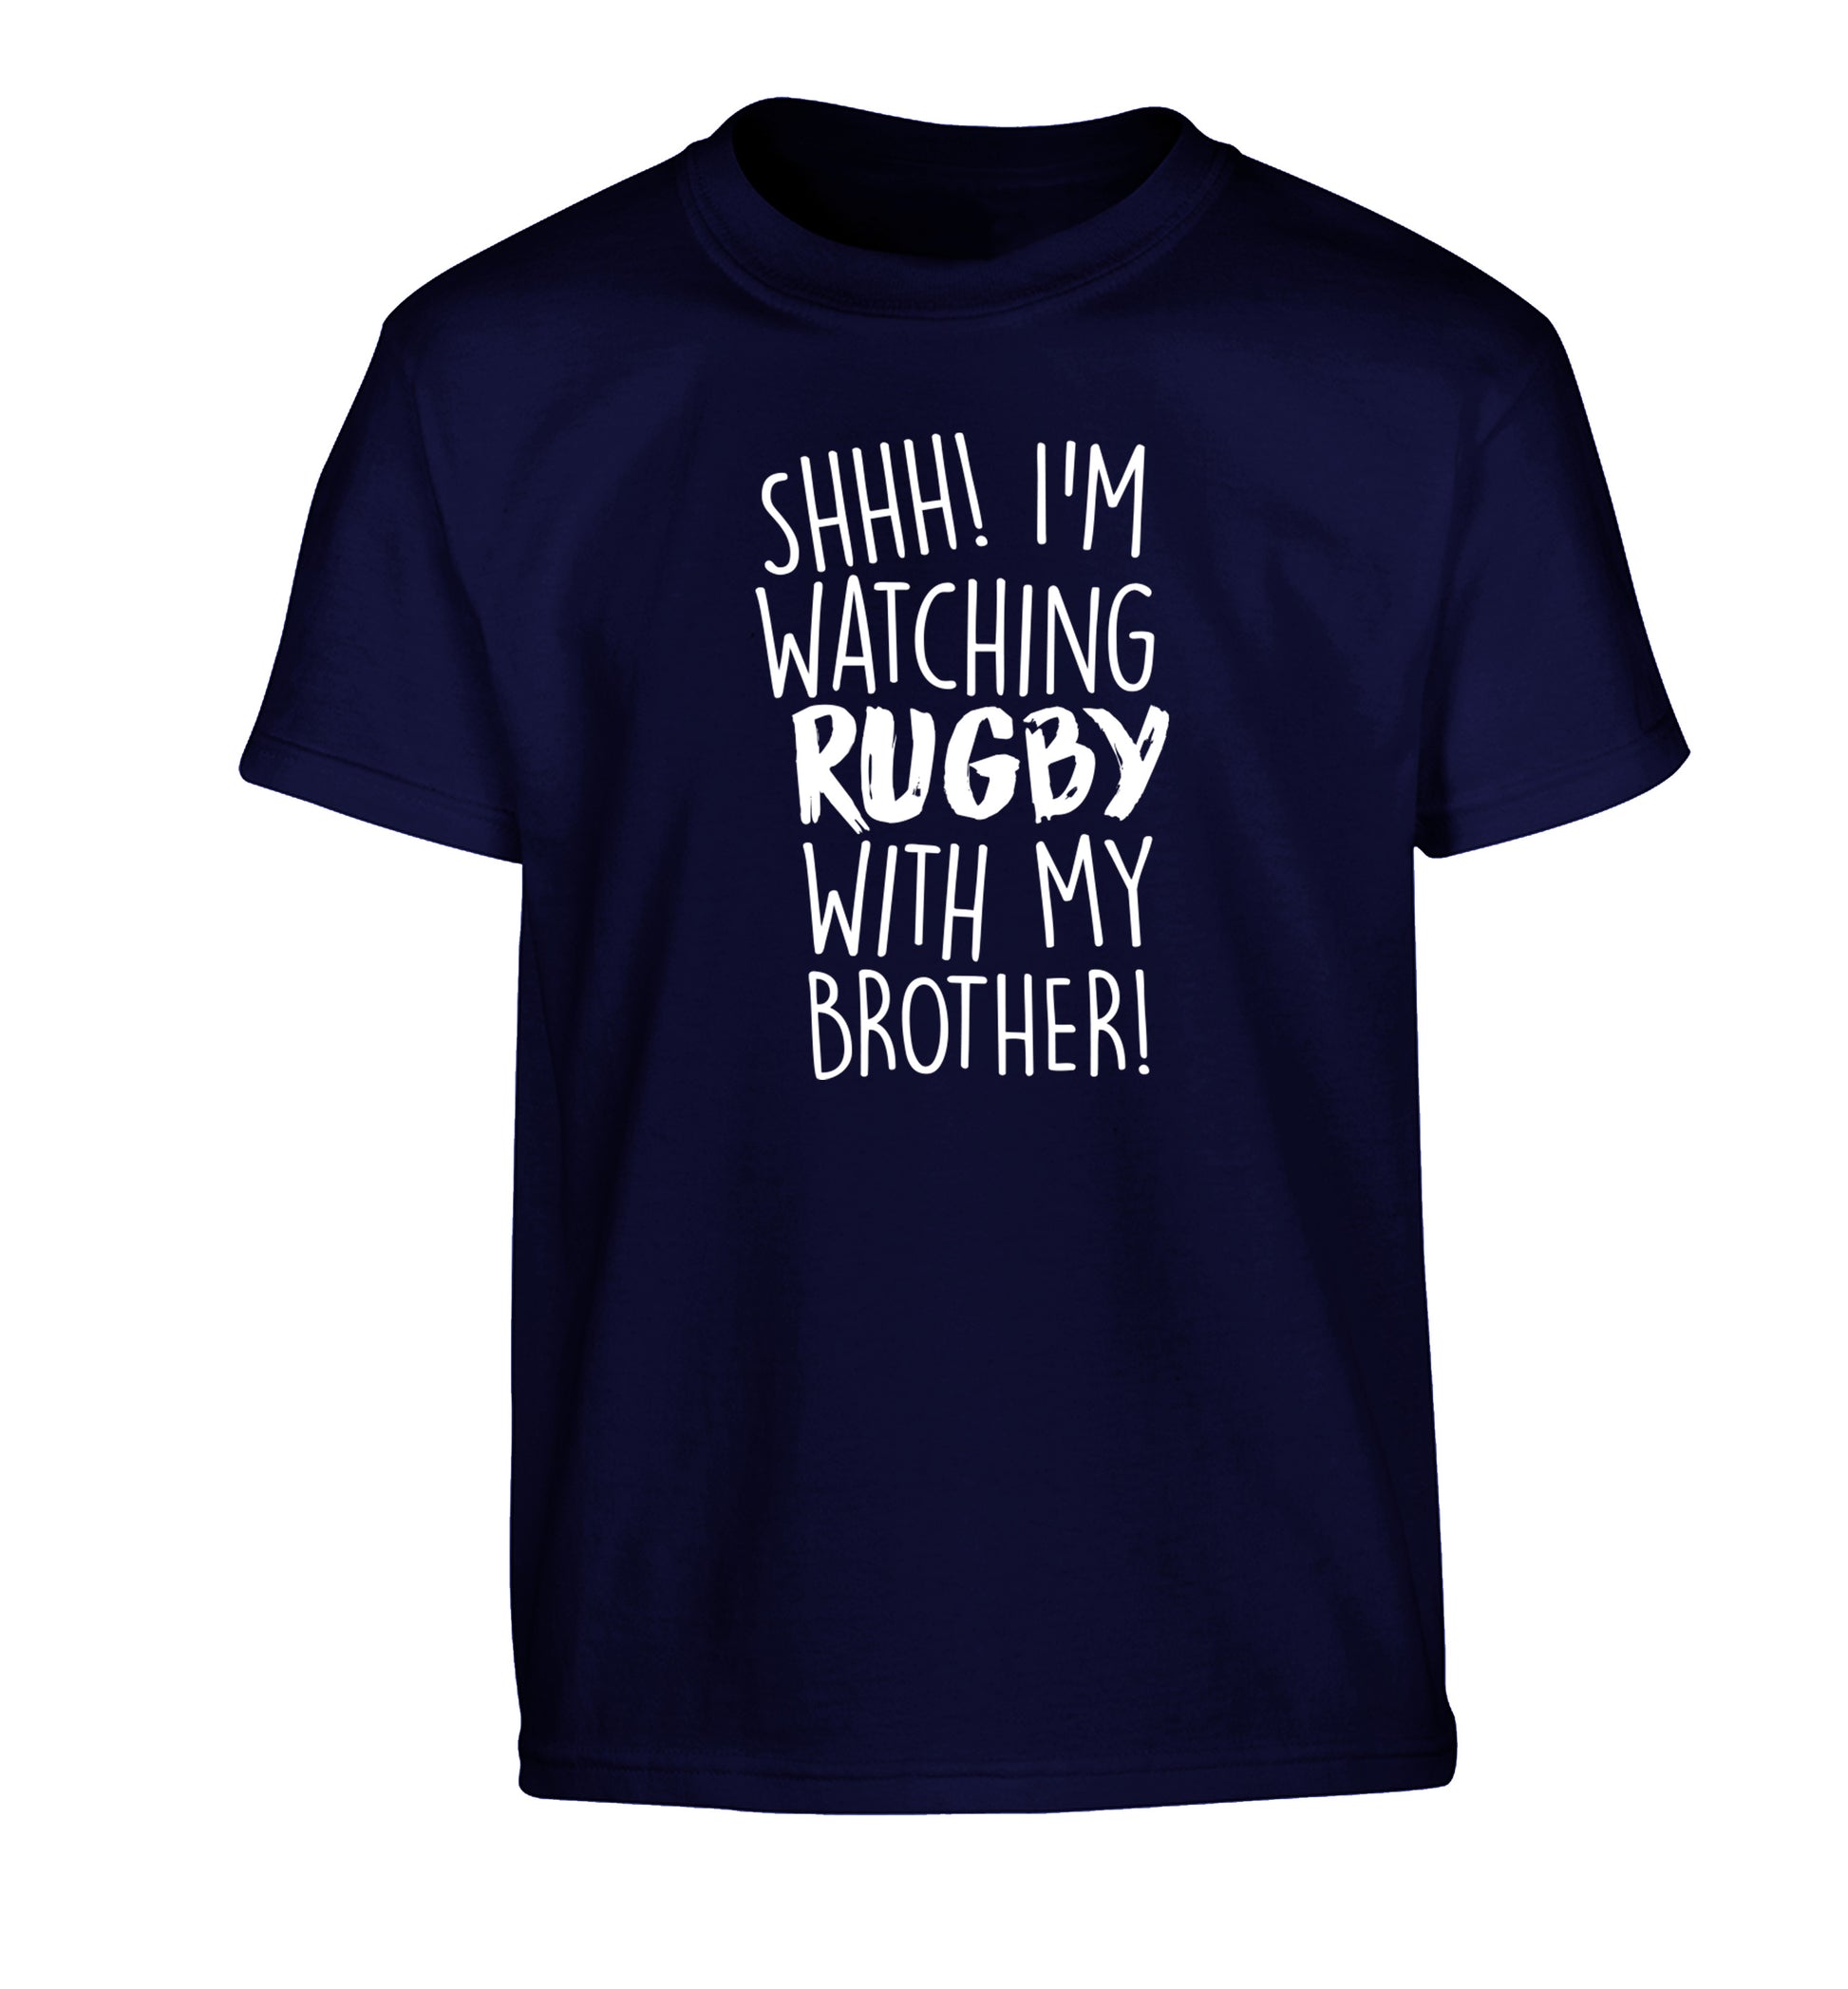 Shh... I'm watching rugby with my brother Children's navy Tshirt 12-13 Years